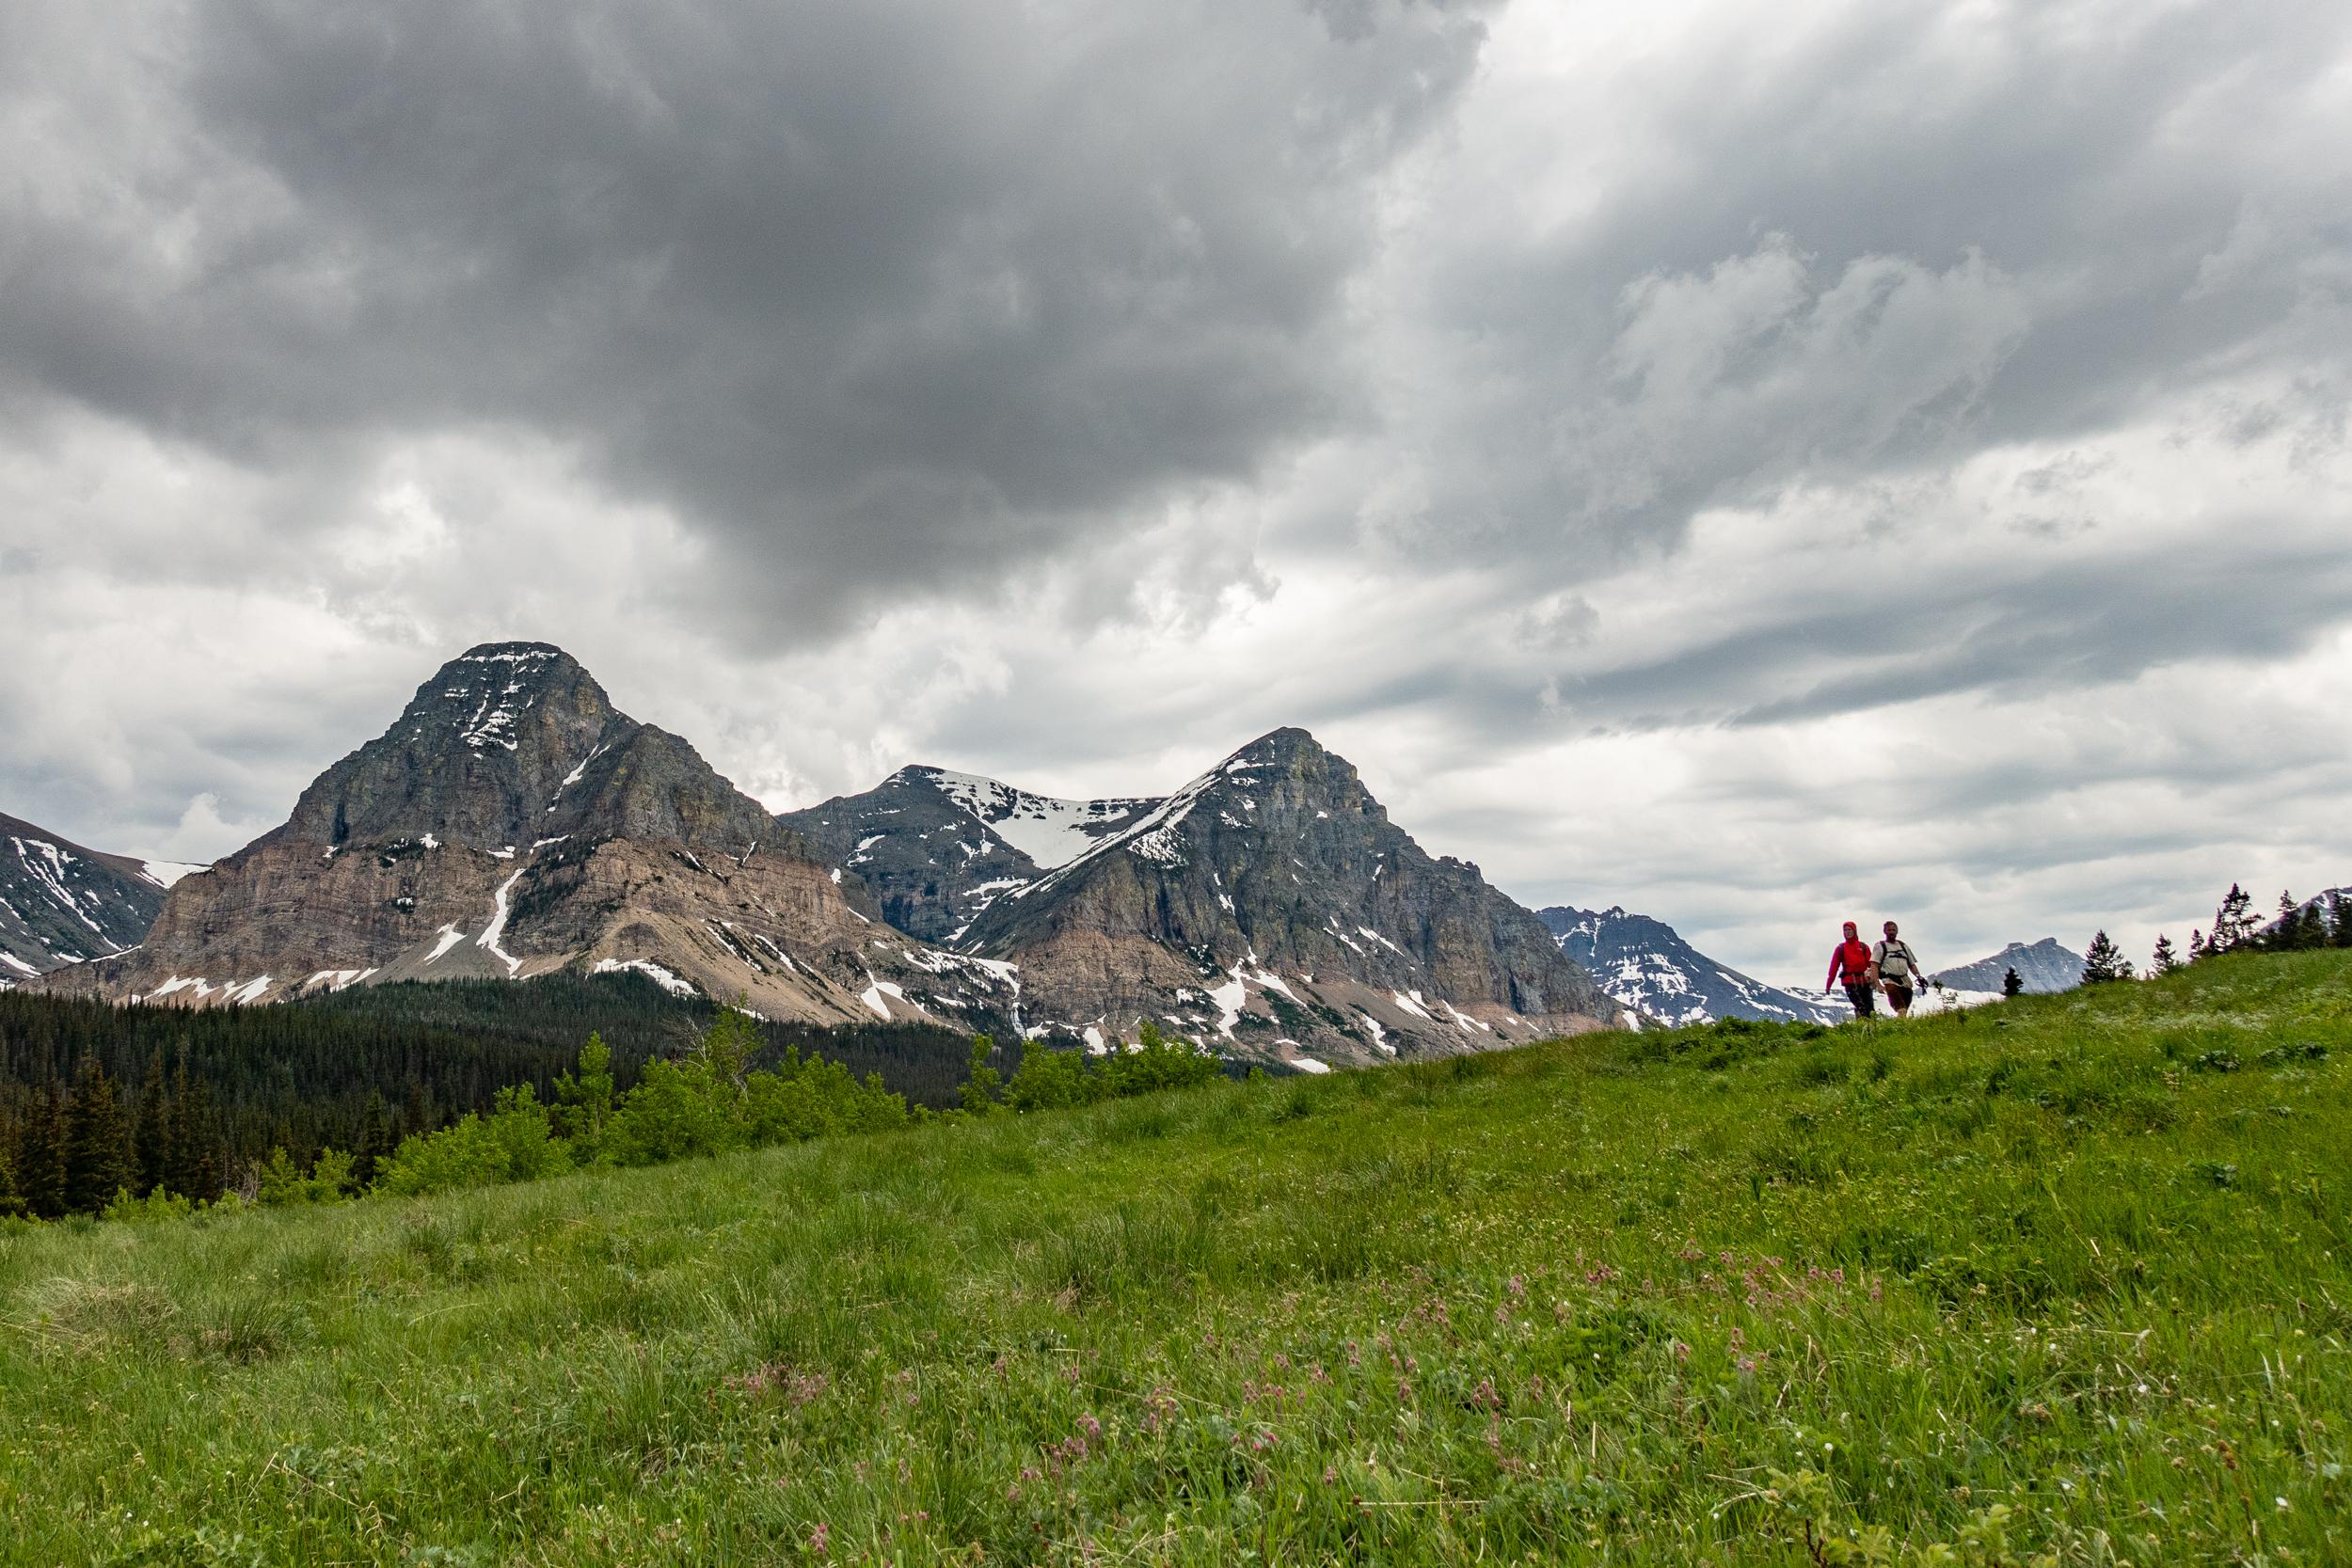 Two people walk down a trail near the Cut Bank Campground under cloudy skies with mountains behind.